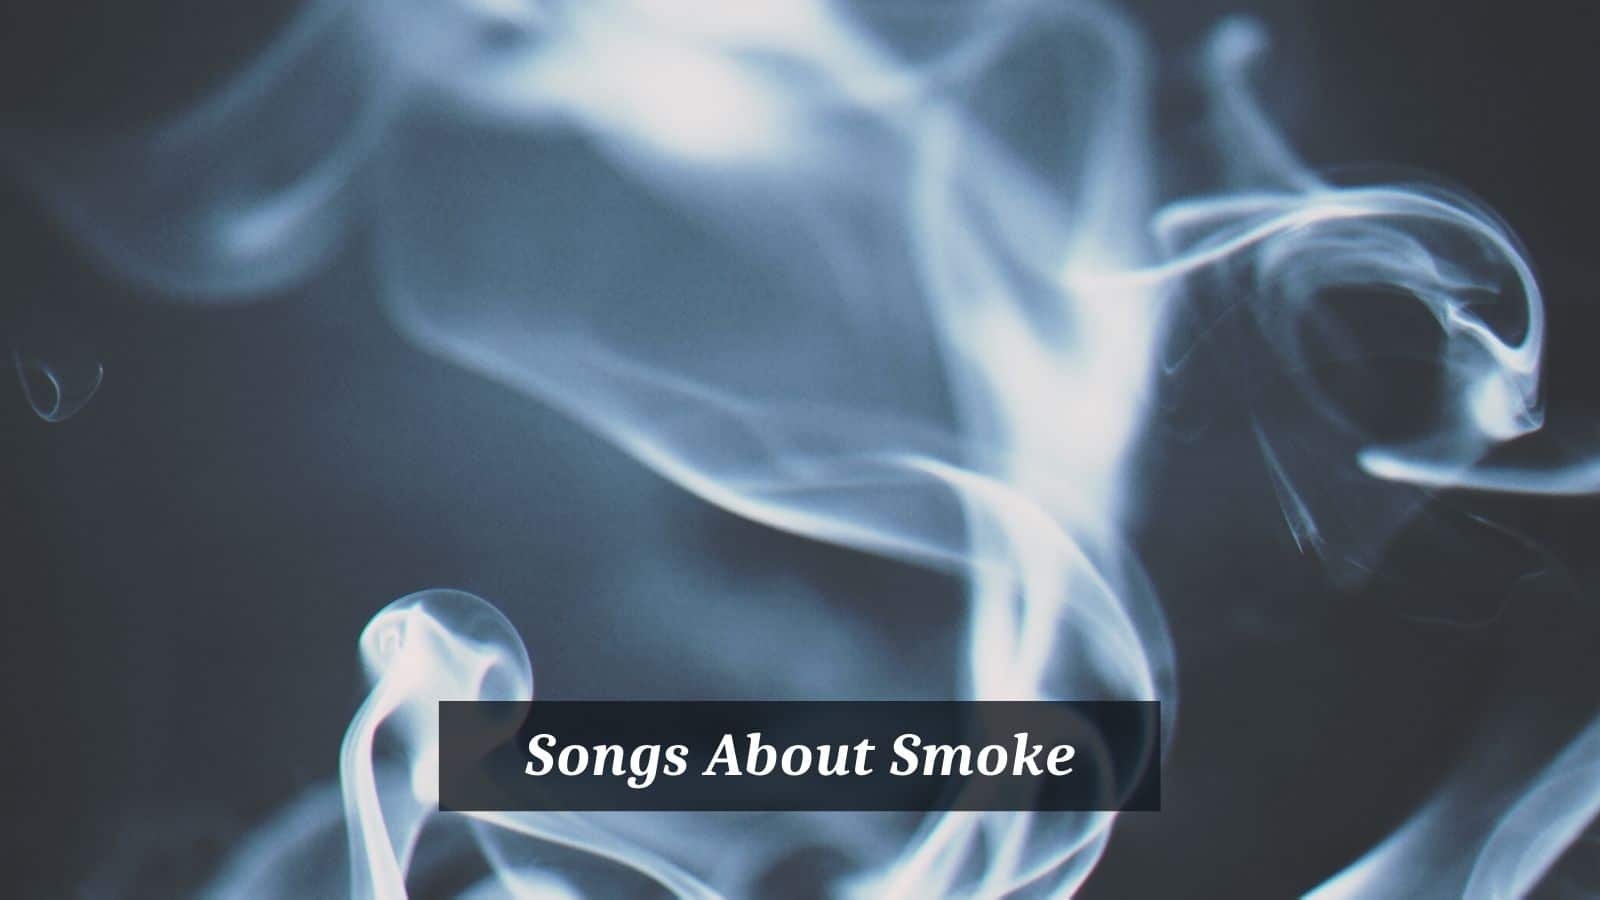 Songs About Smoke